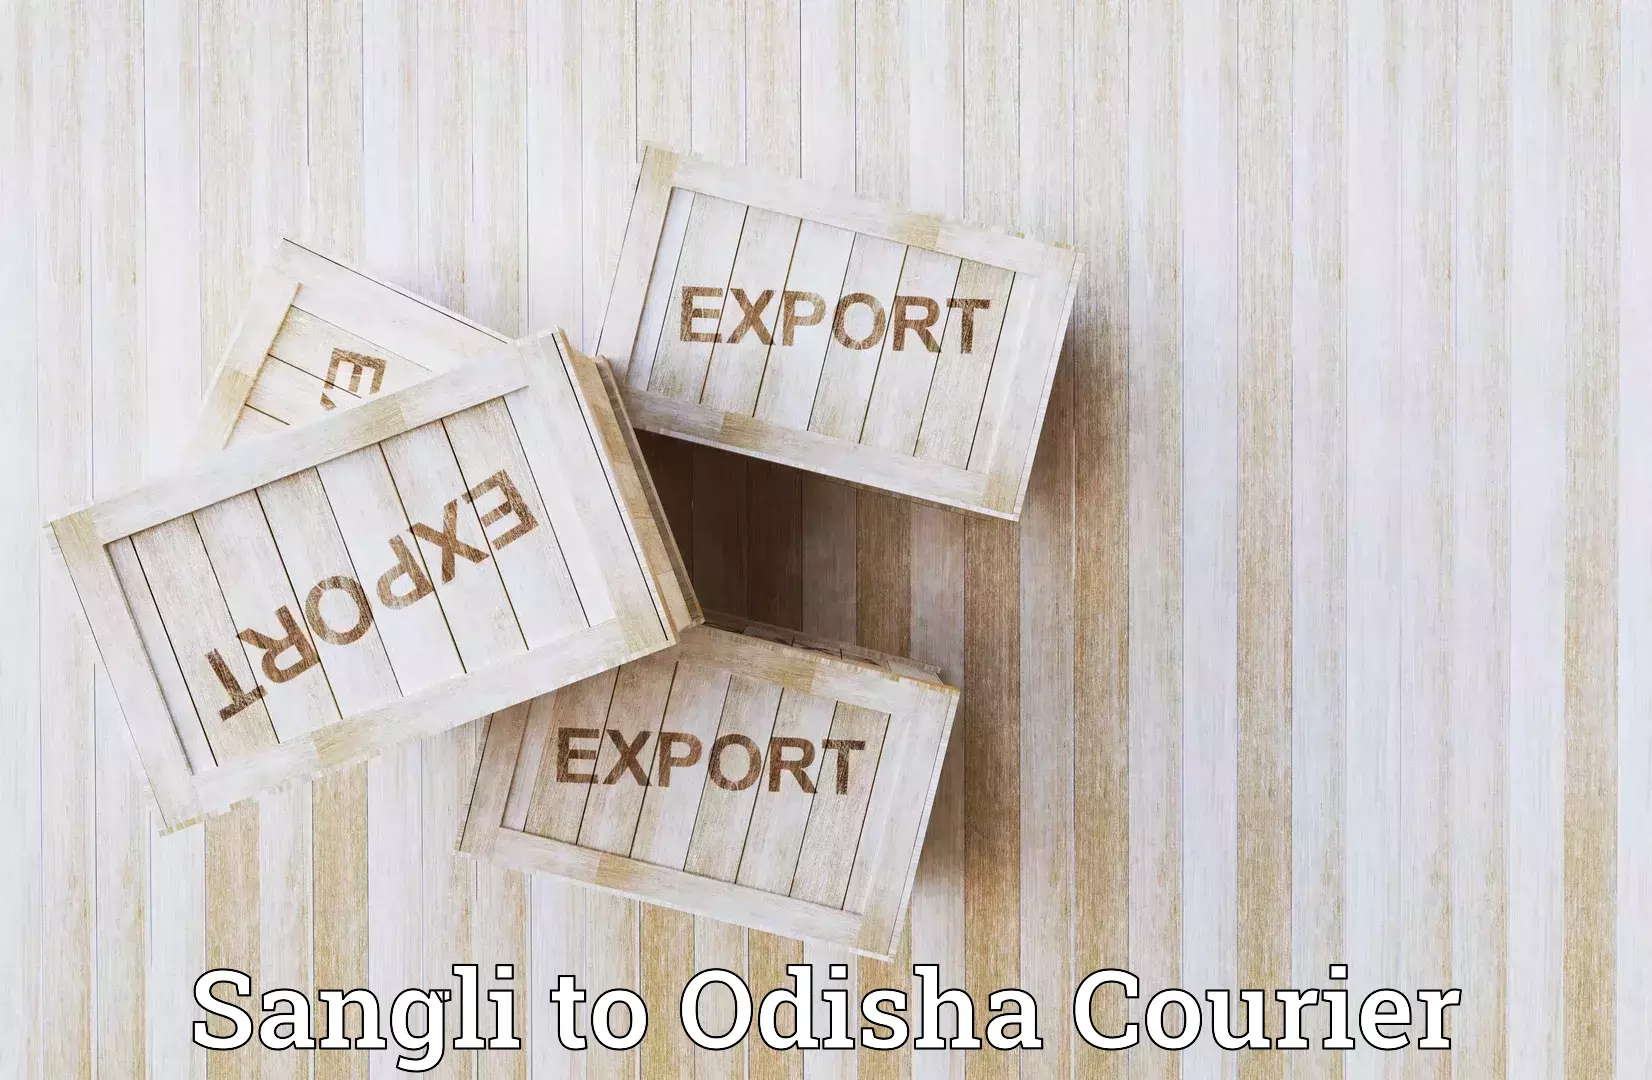 Courier service booking Sangli to Paradip Port